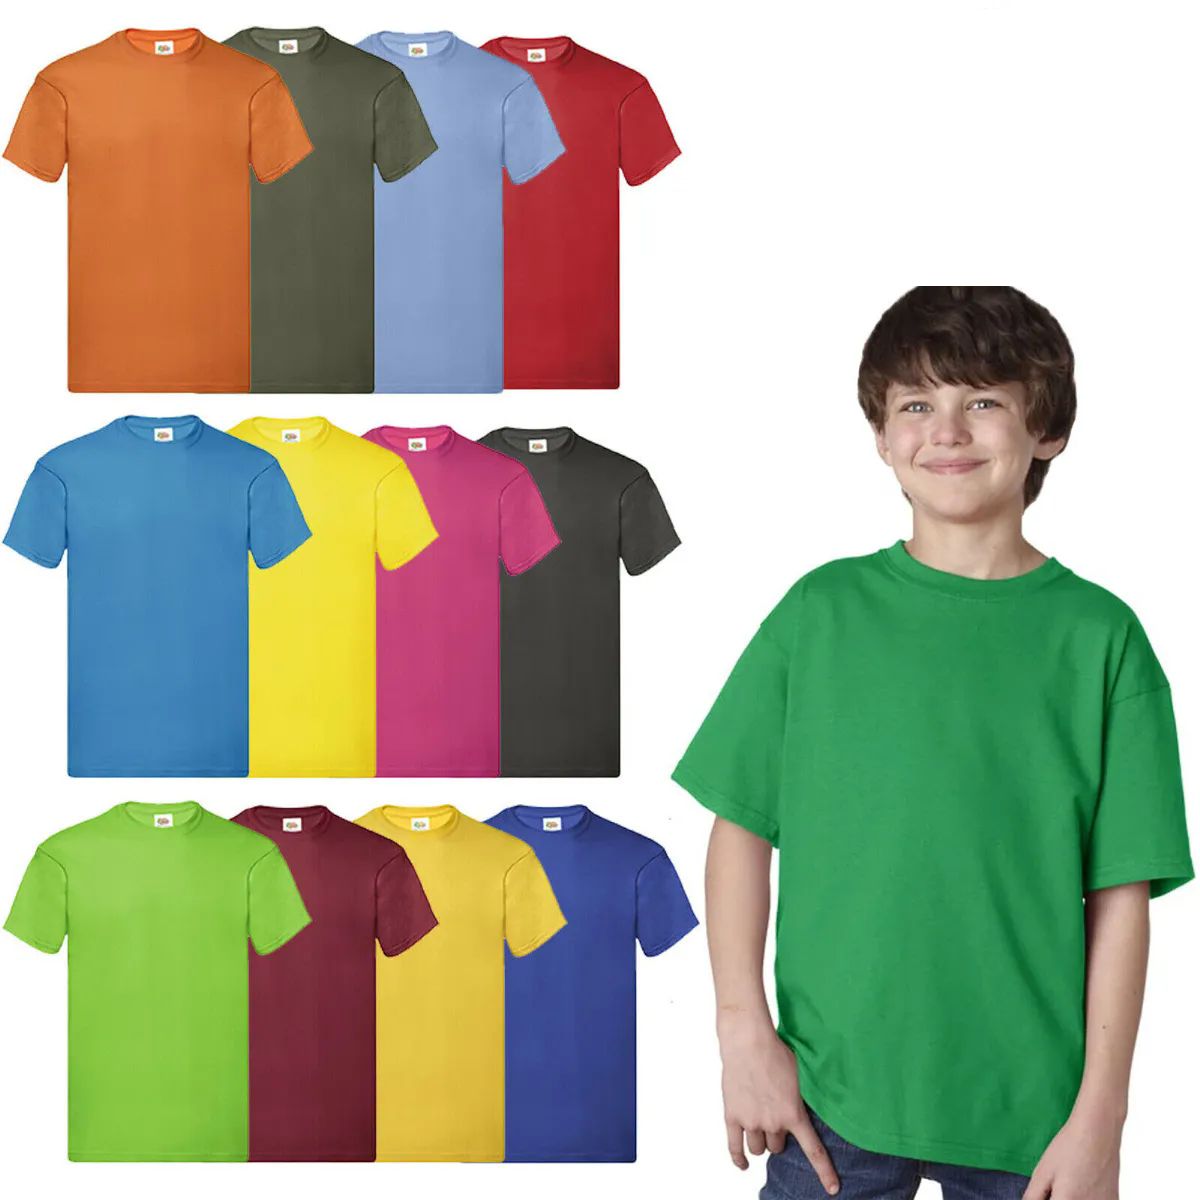 12 Pieces of Billionhats Kids Youth Cotton Assorted Colors T-Shirts Size Medium